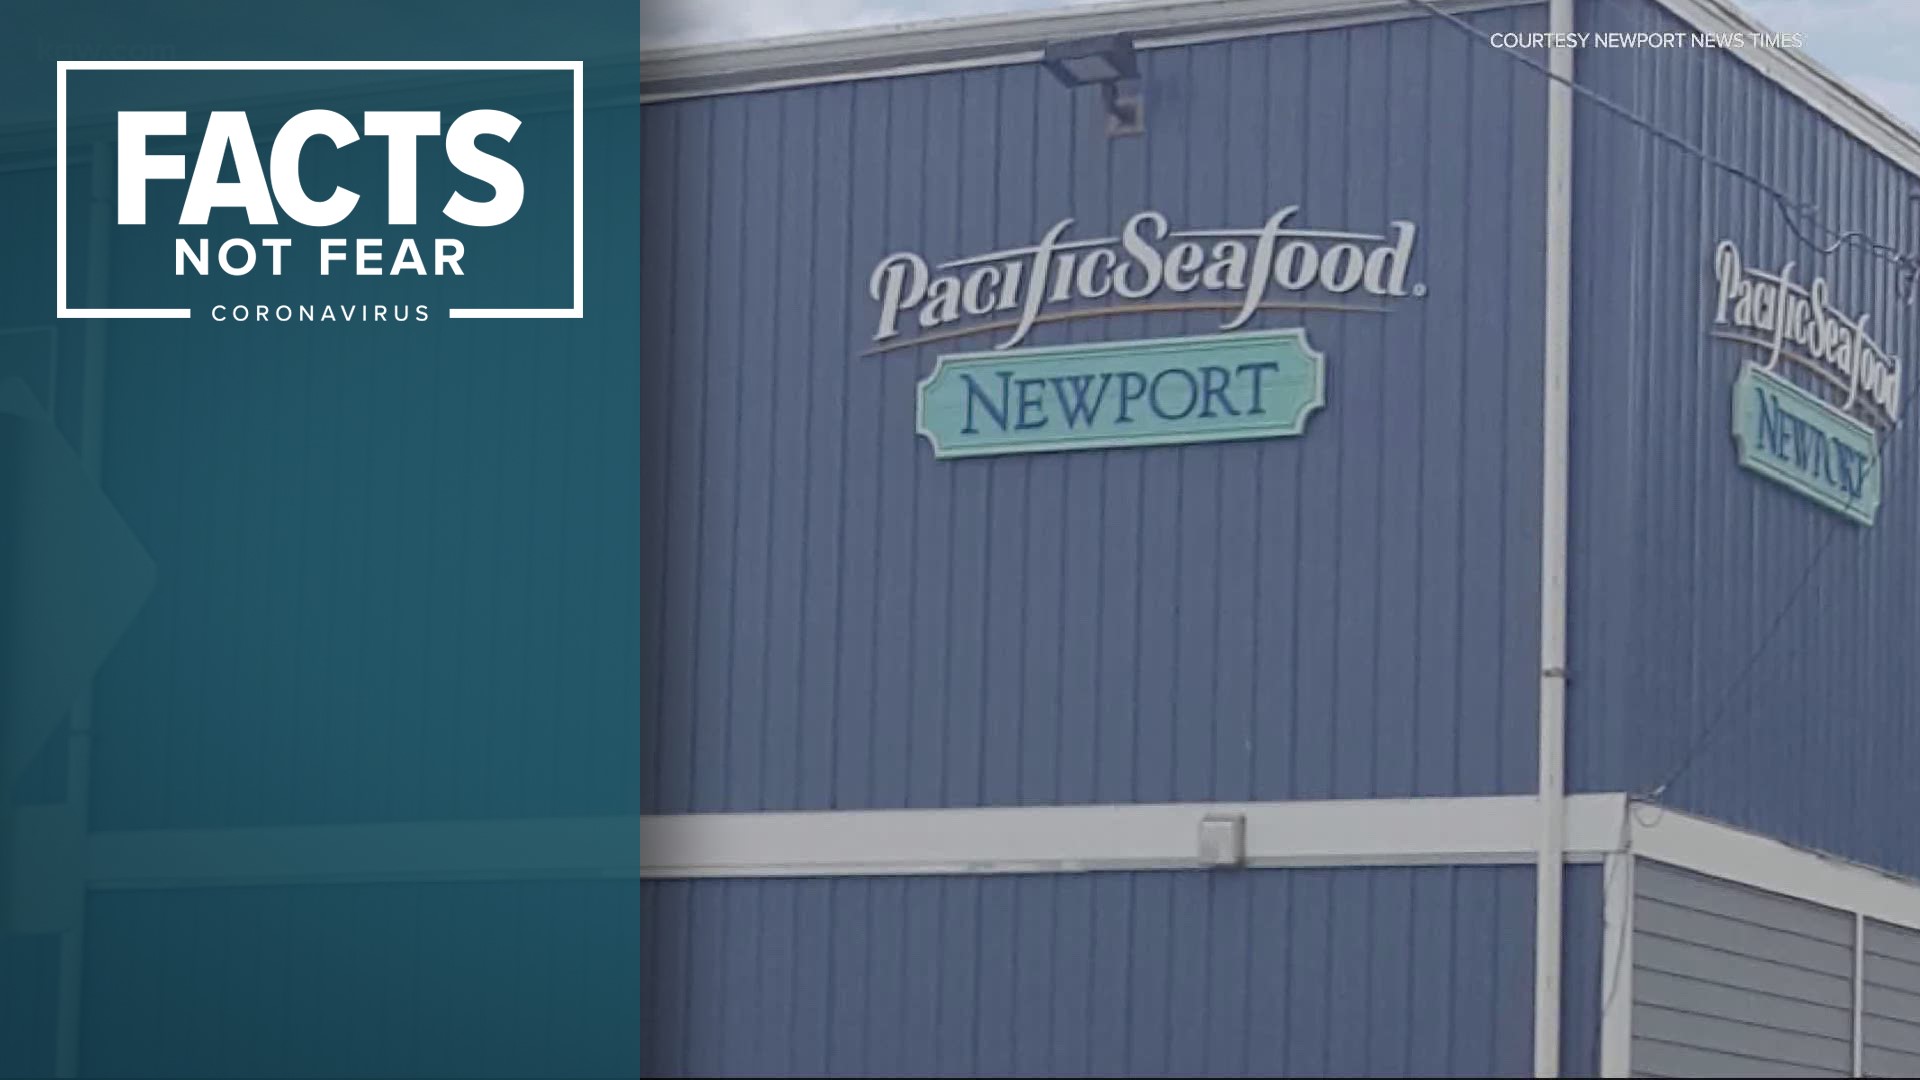 New COVID-19 test results on Sunday revealed that an outbreak at Pacific Seafood's plant in Newport has grown to 124 cases.